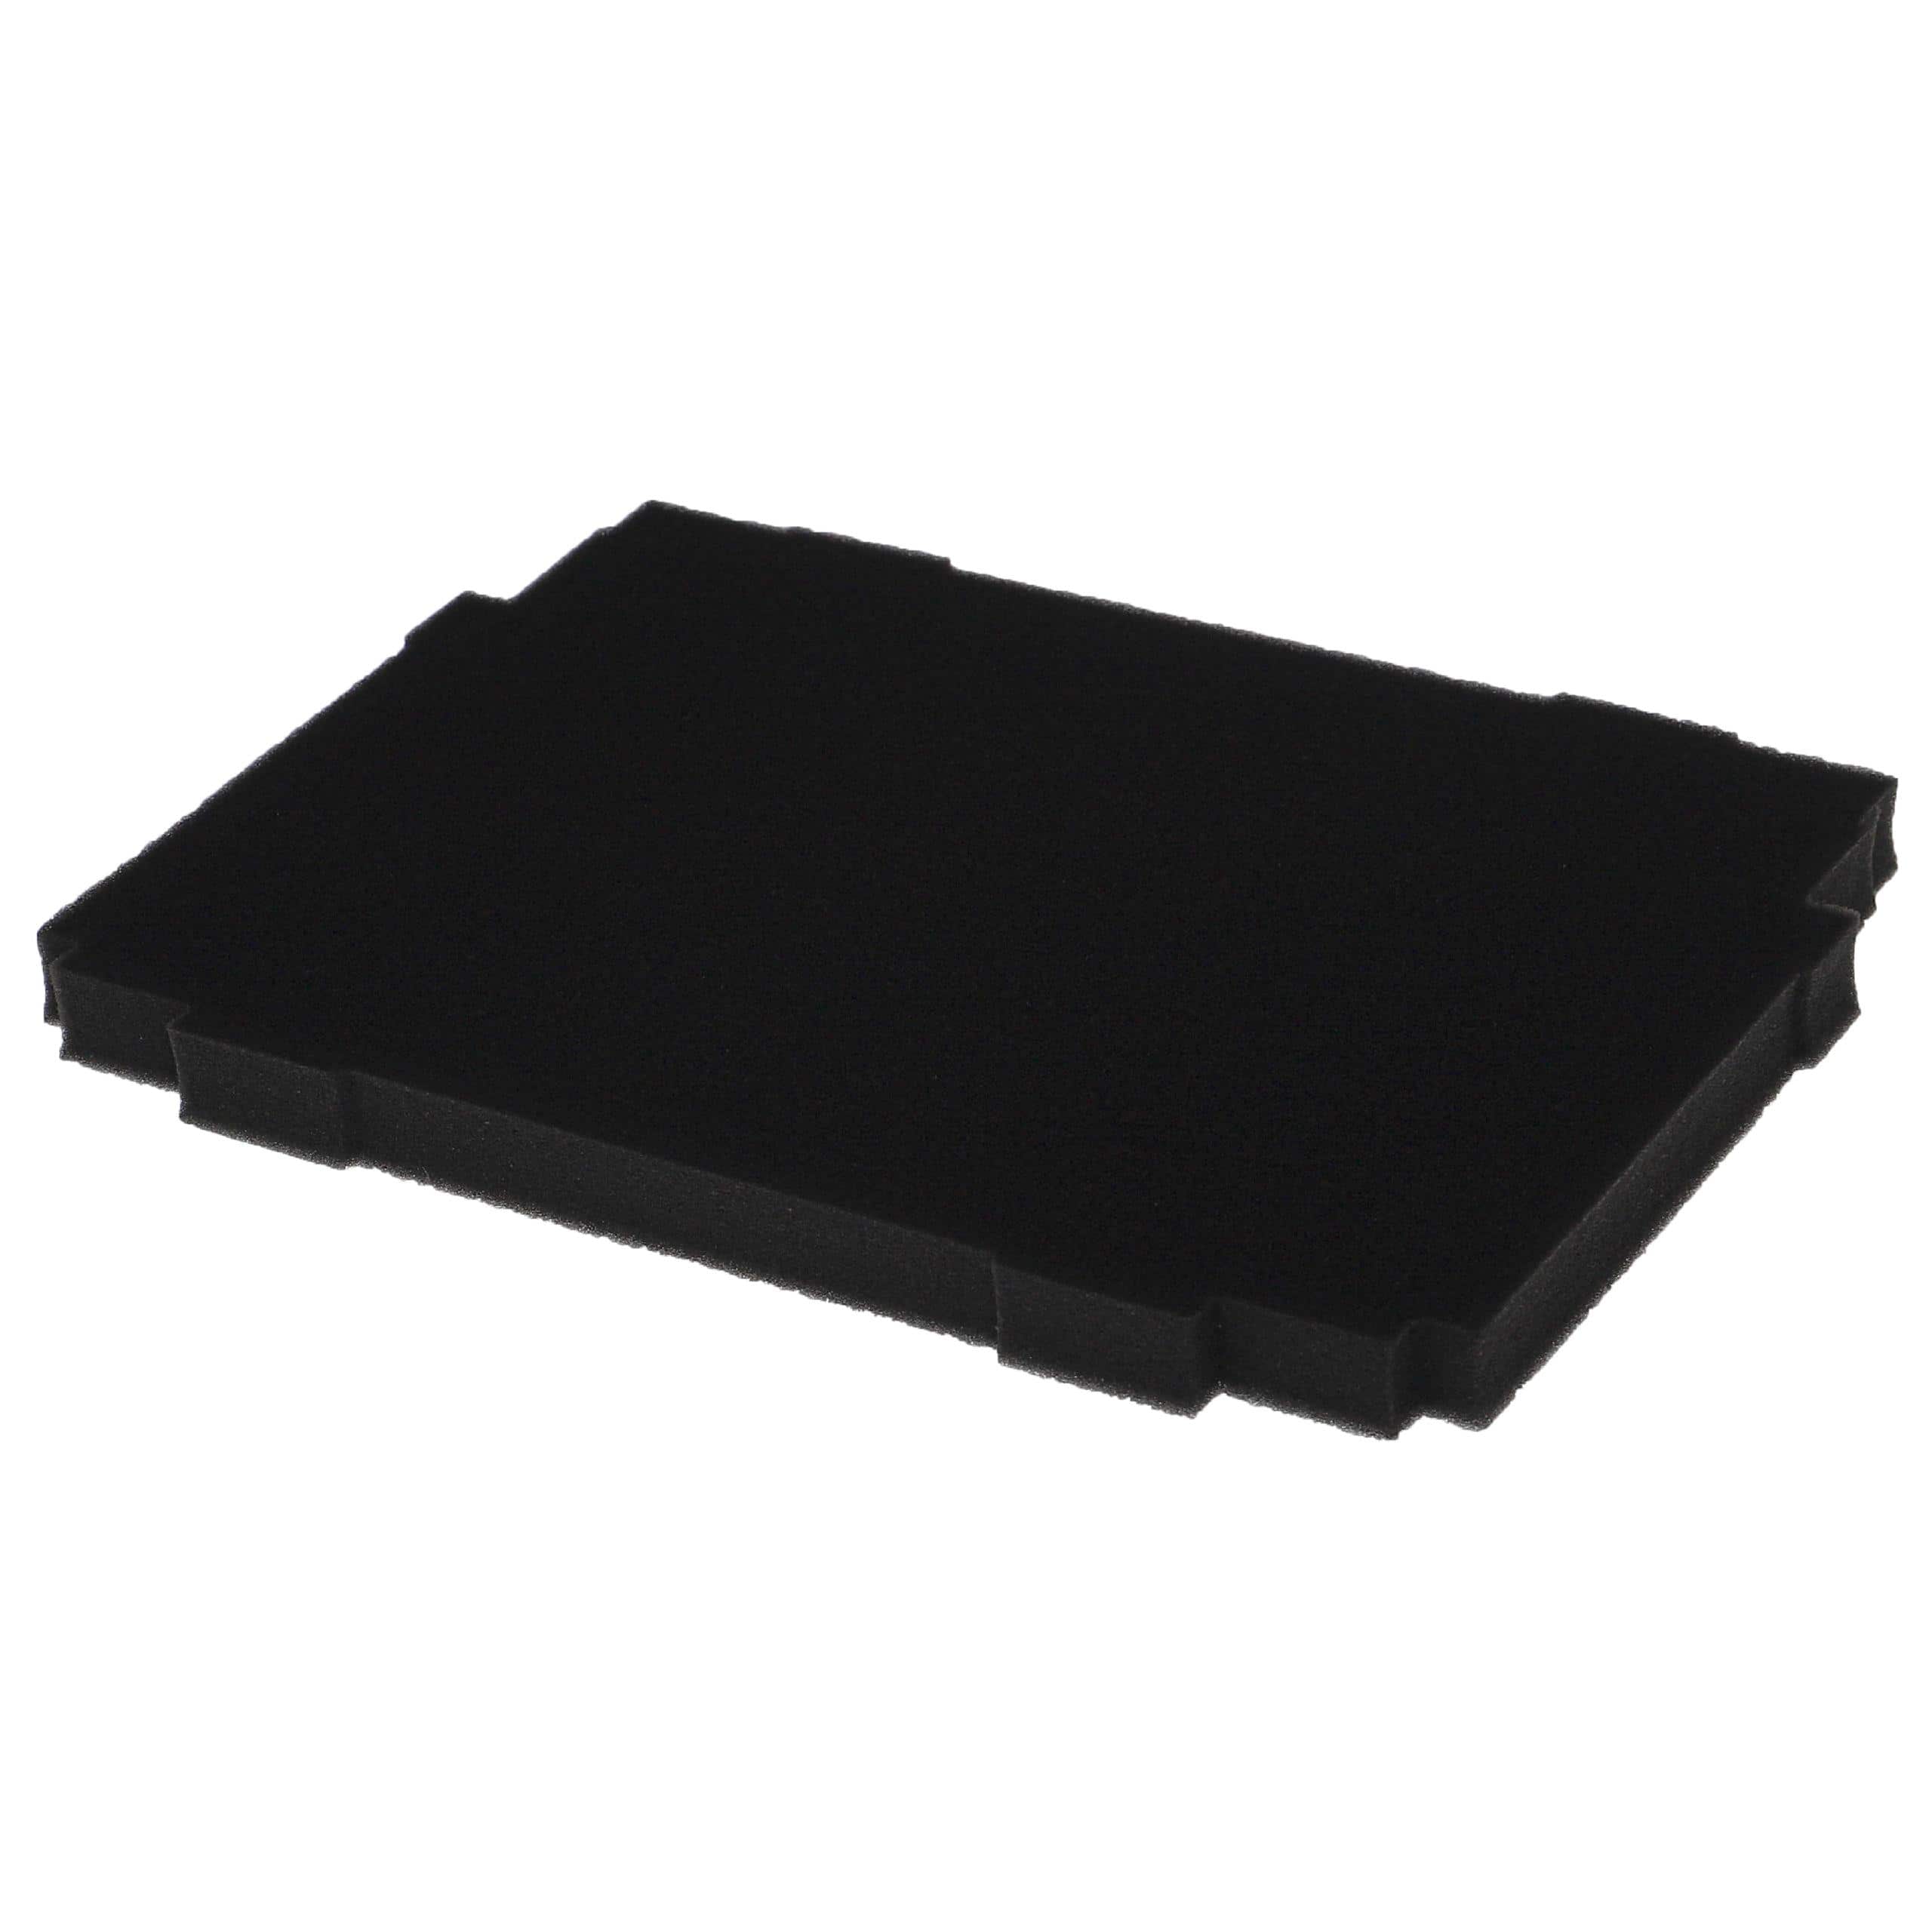 vhbw Foam Insert Replacement for 4250155837464 for Toolbox - Customisable, Adaptable Foam Black